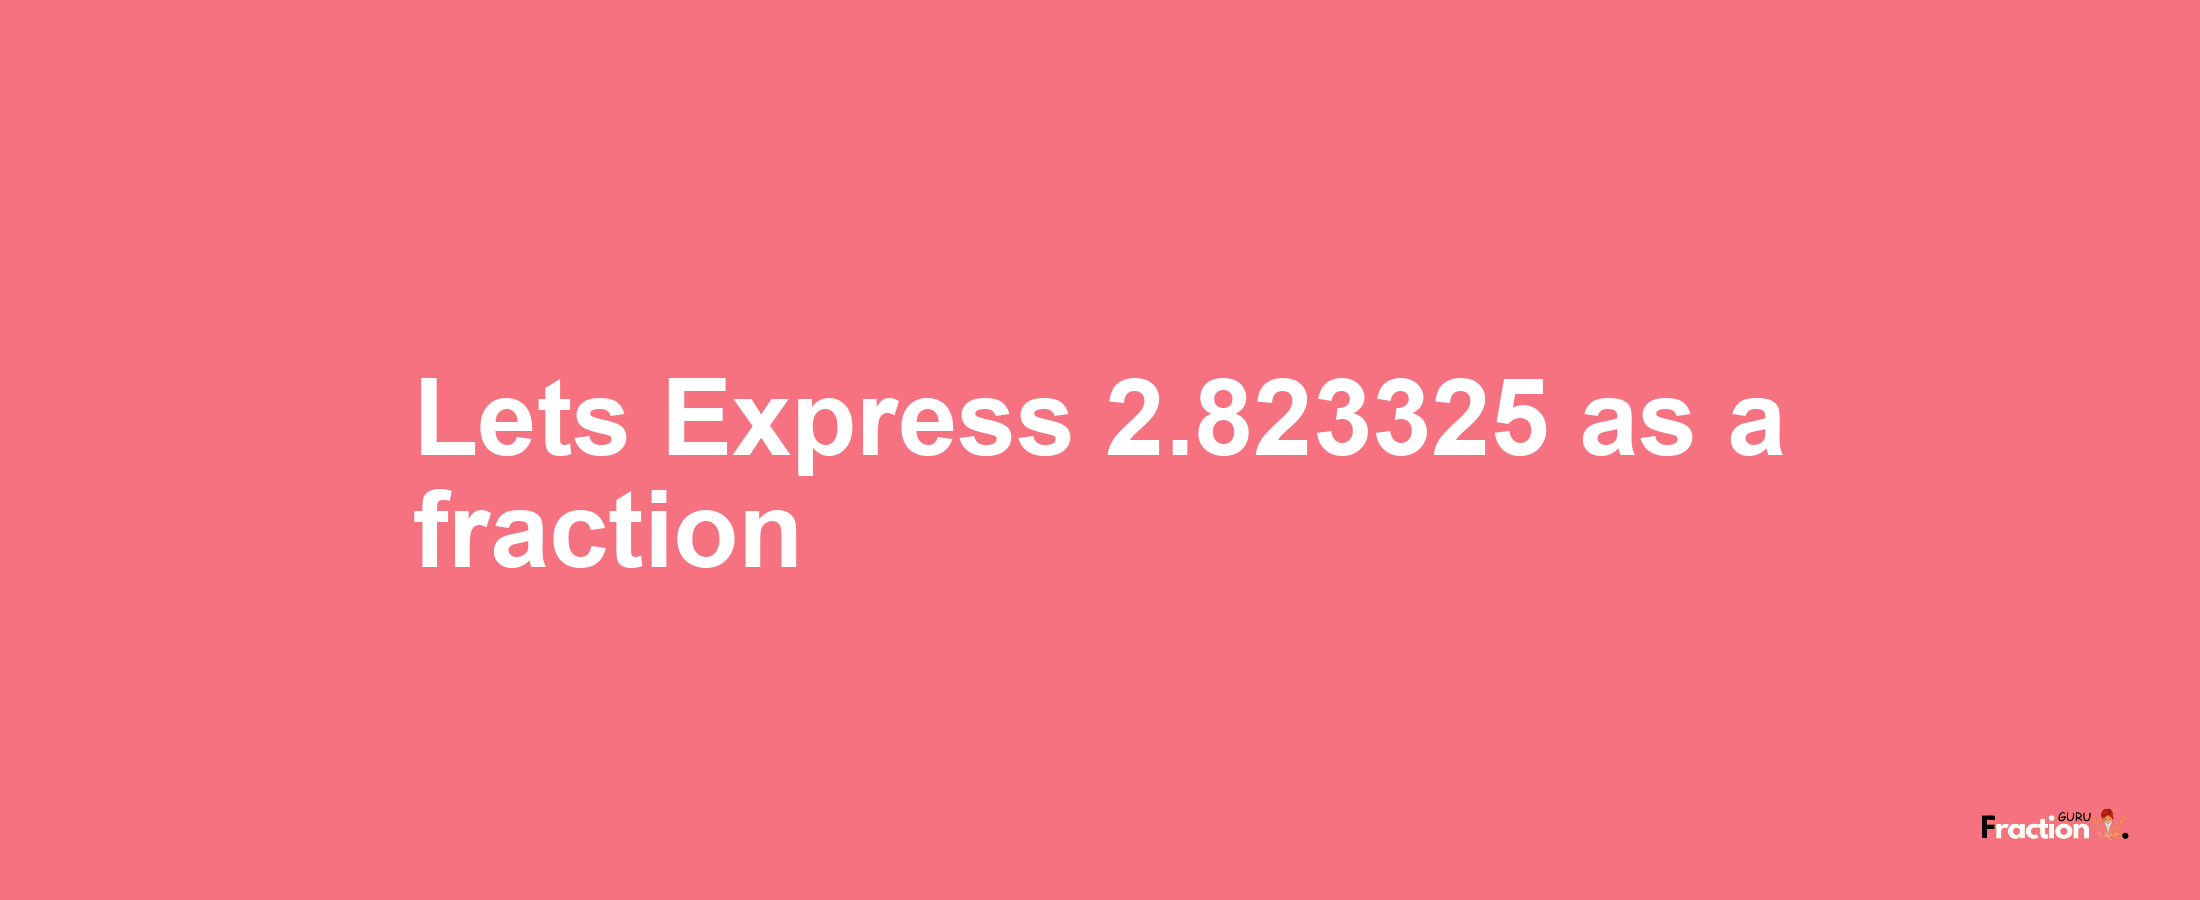 Lets Express 2.823325 as afraction